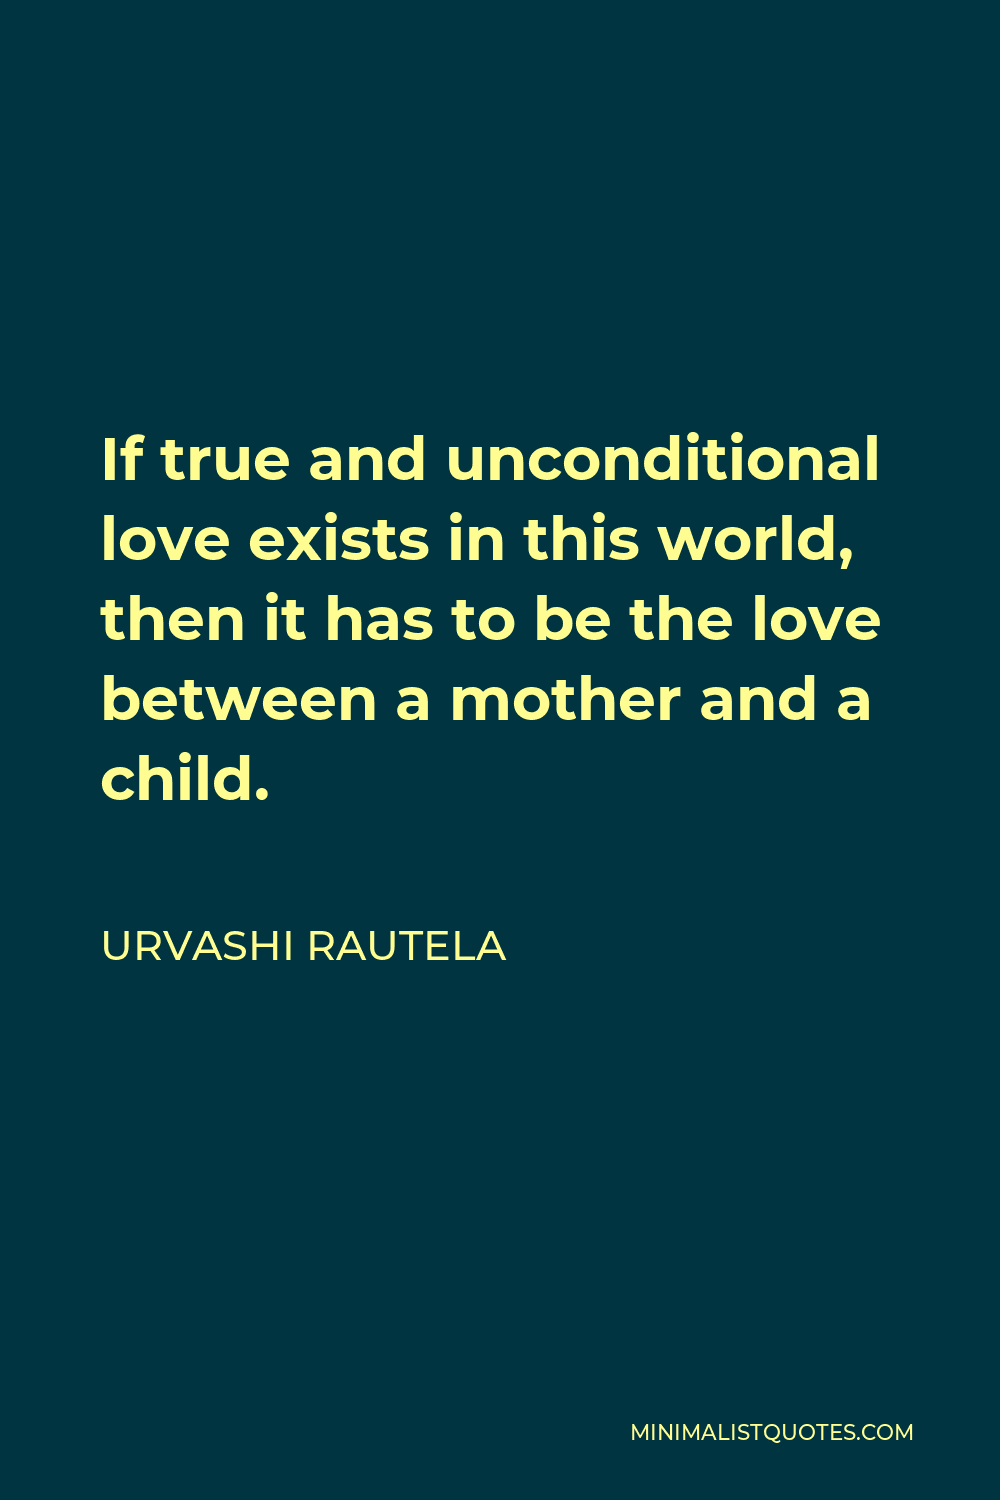 Urvashi Rautela Quote - If true and unconditional love exists in this world, then it has to be the love between a mother and a child.